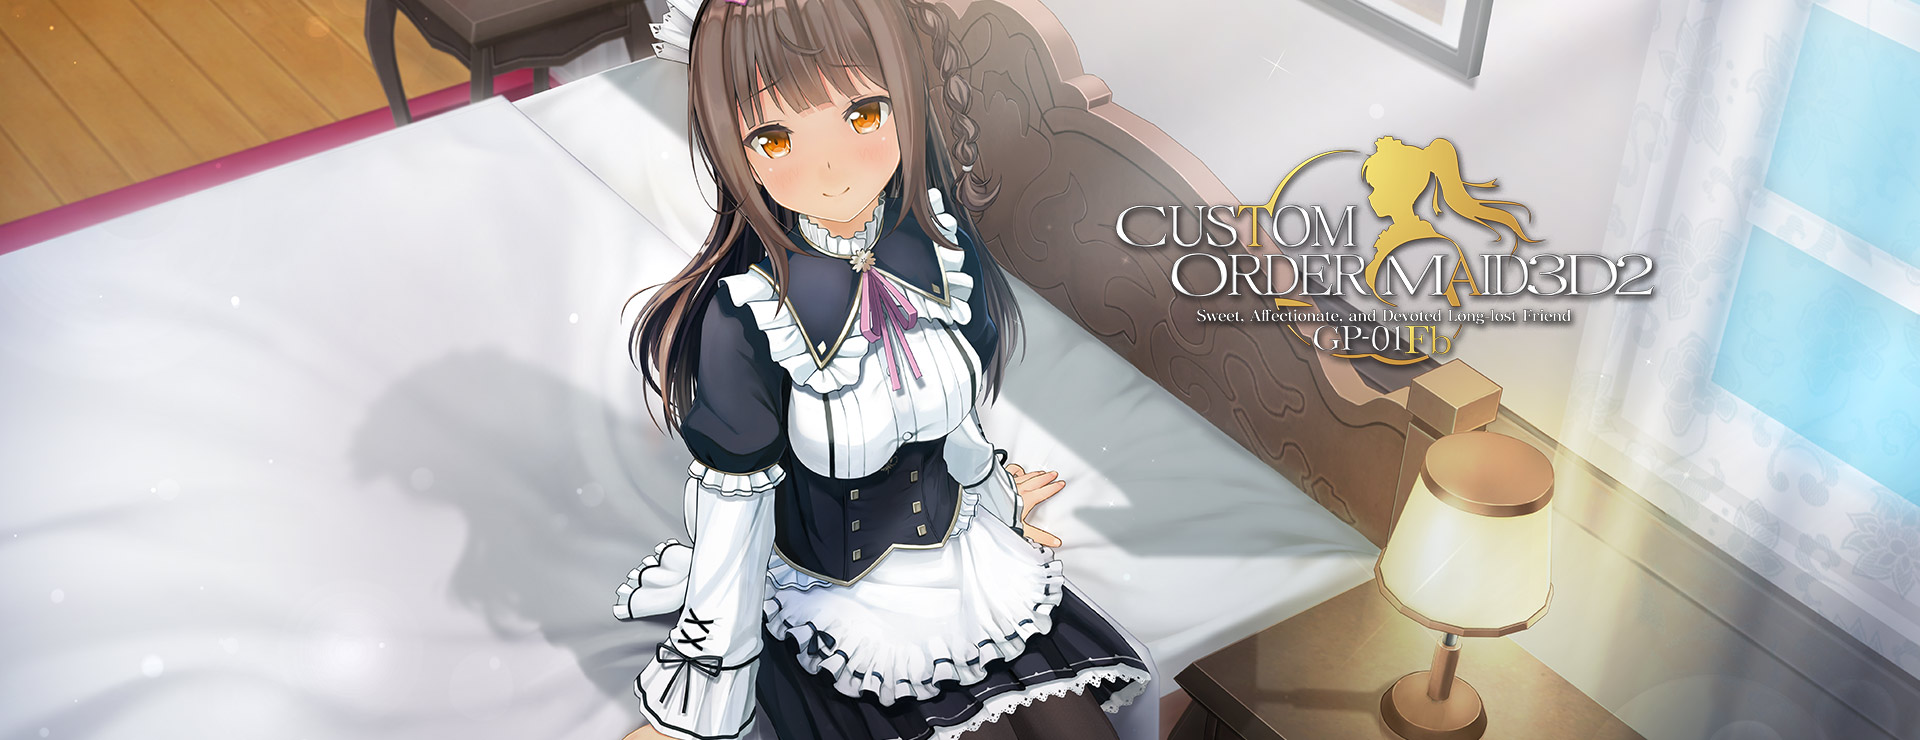 Custom Order Maid 3D 2: Sweet, Affectionate, and Devoted Long-lost Friend GP-01Fb - Simulation Game